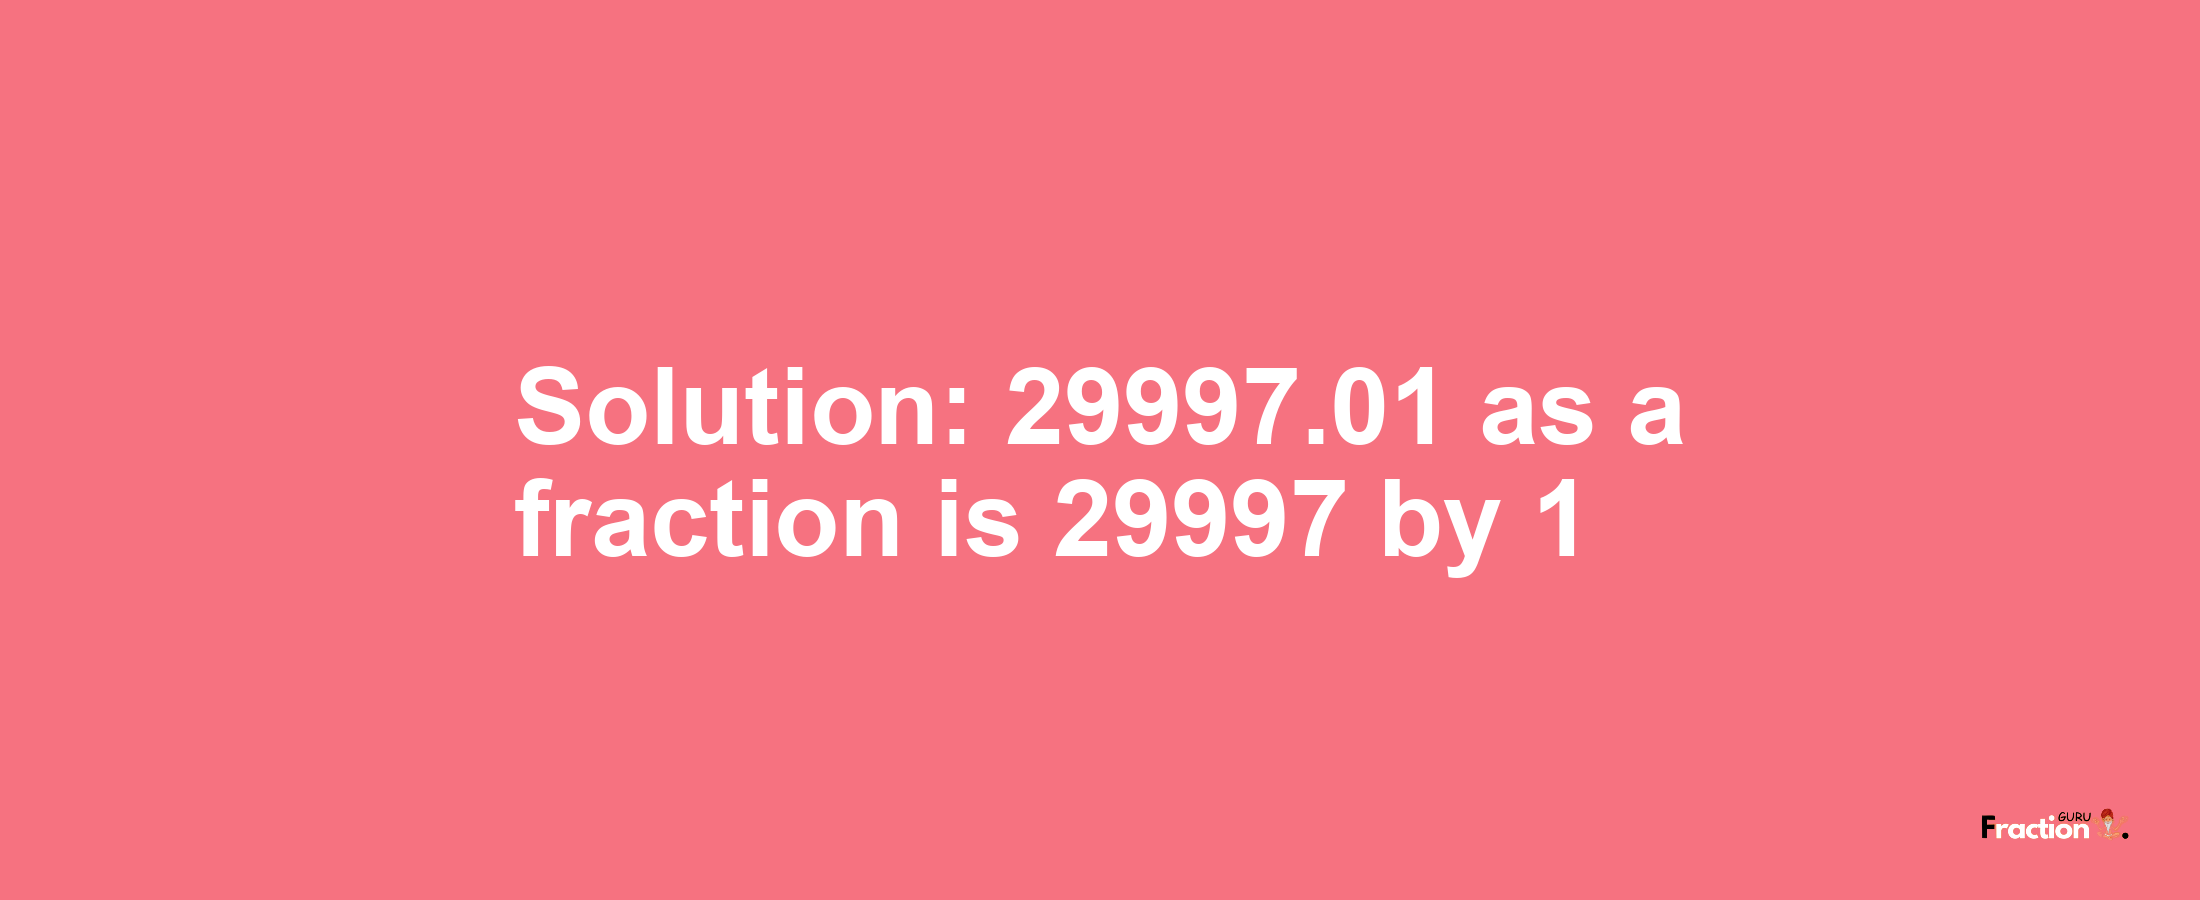 Solution:29997.01 as a fraction is 29997/1